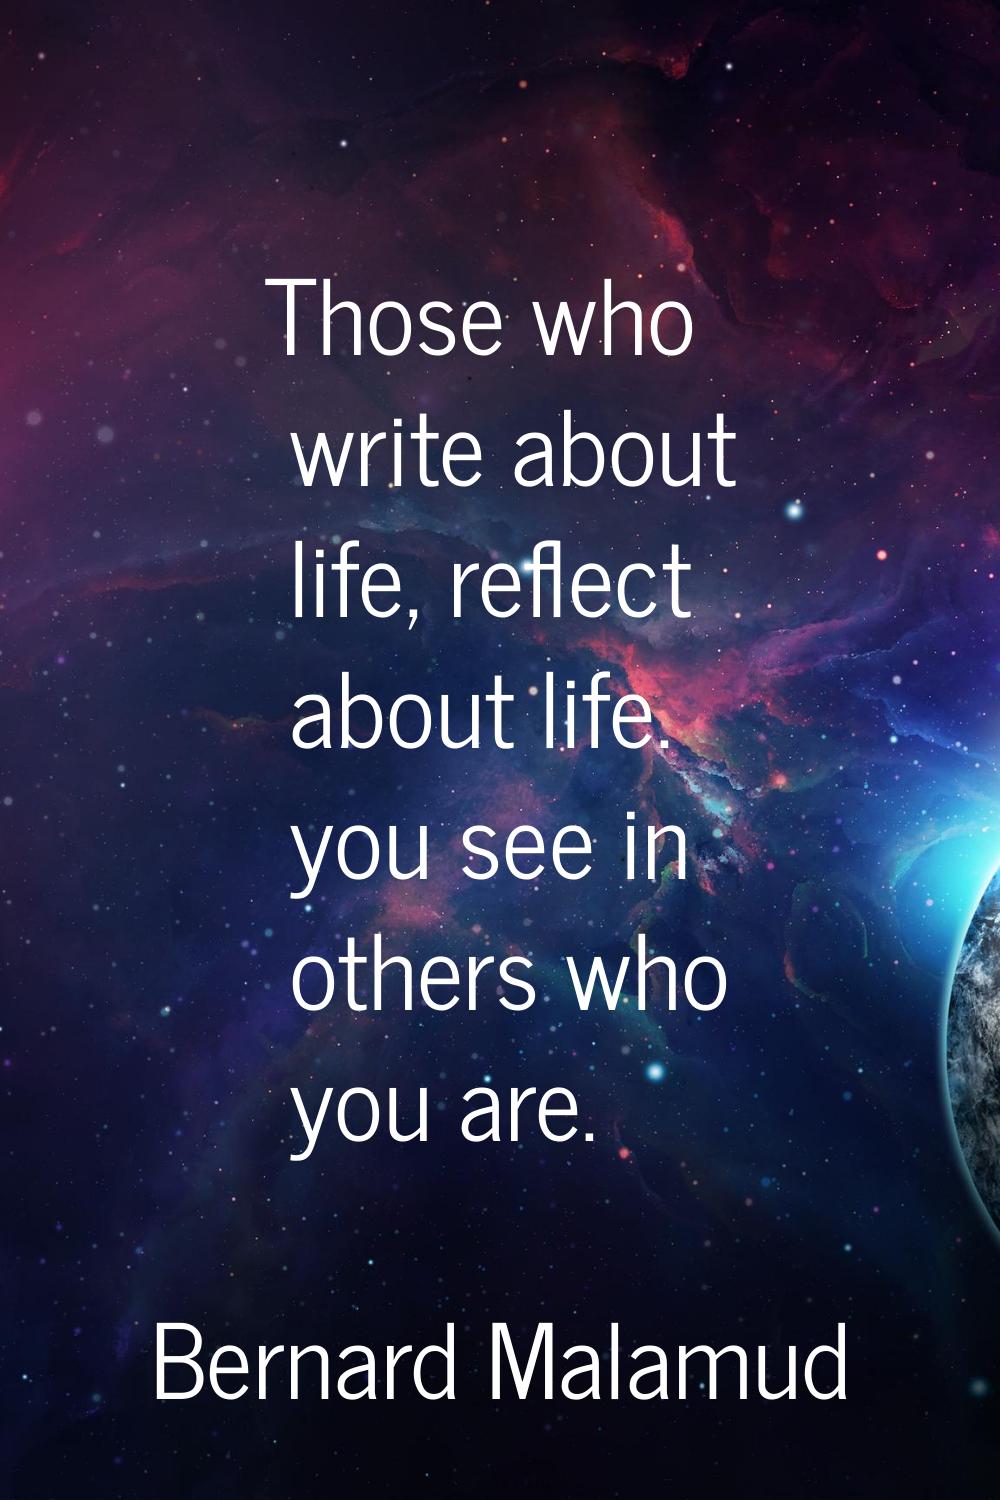 Those who write about life, reflect about life. you see in others who you are.